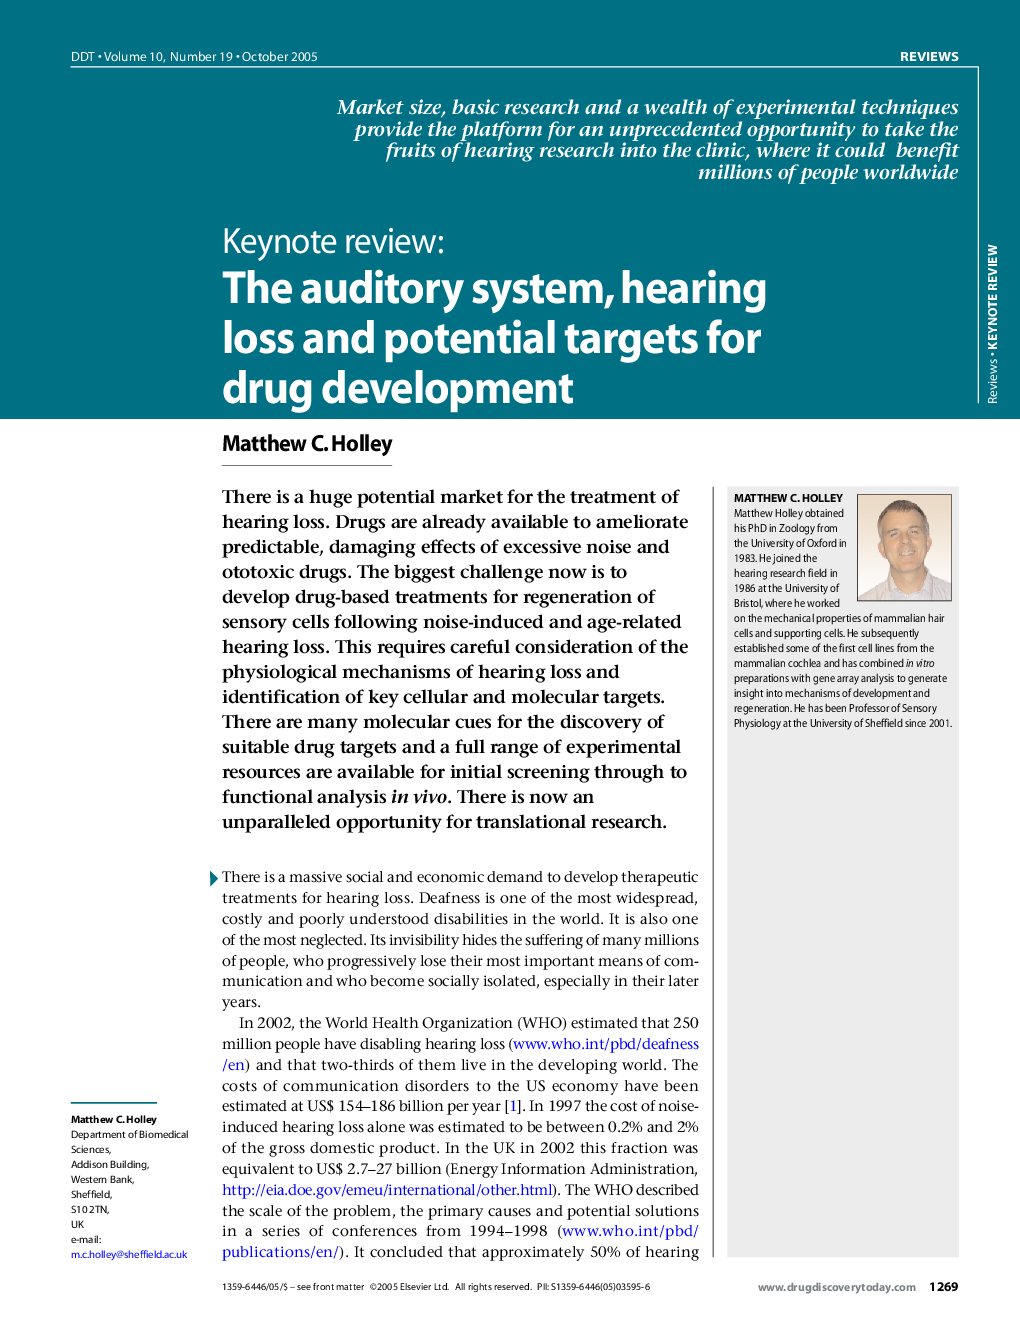 Keynote review: The auditory system, hearing loss and potential targets for drug development